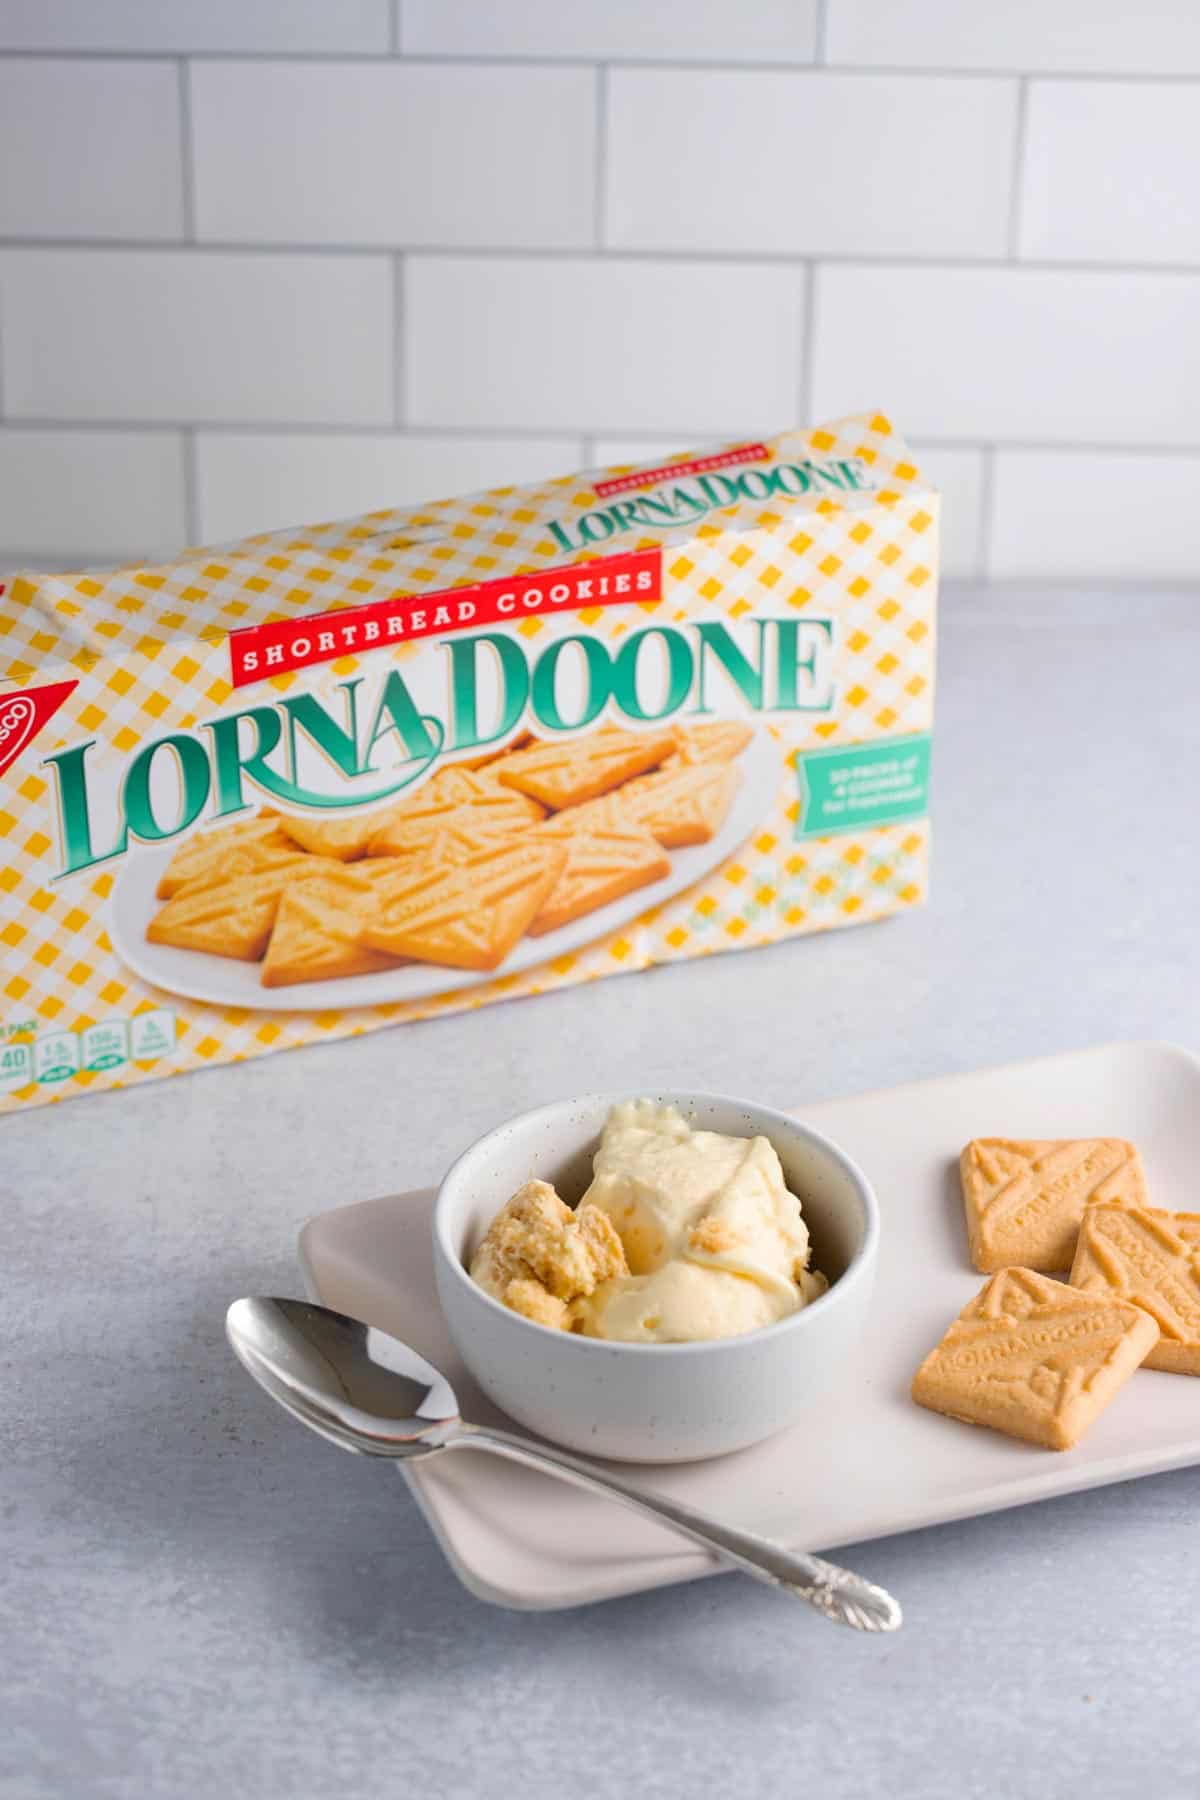 A bowl of banana pudding made with shortbread cookies with a box of Lorna Doone cookies in the background.